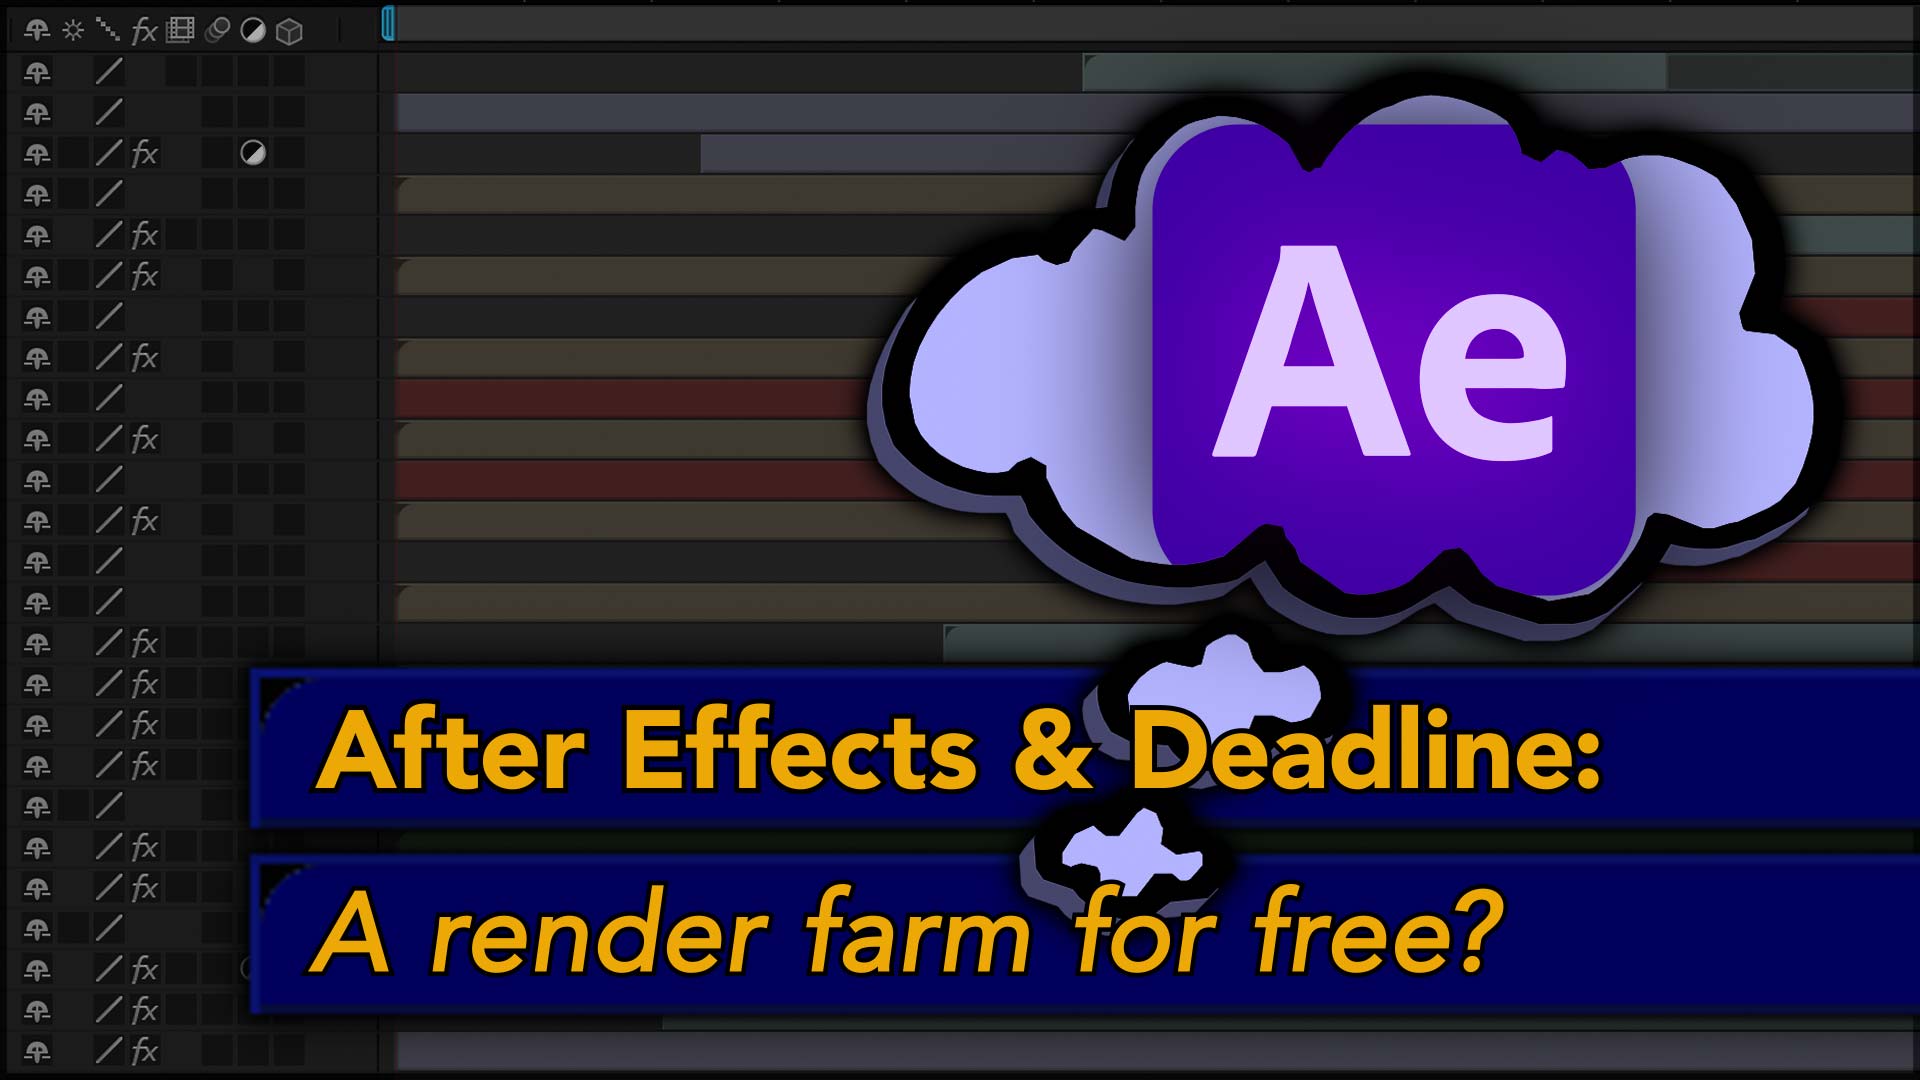 After Effects: Using Deadline for a Render Farm 13